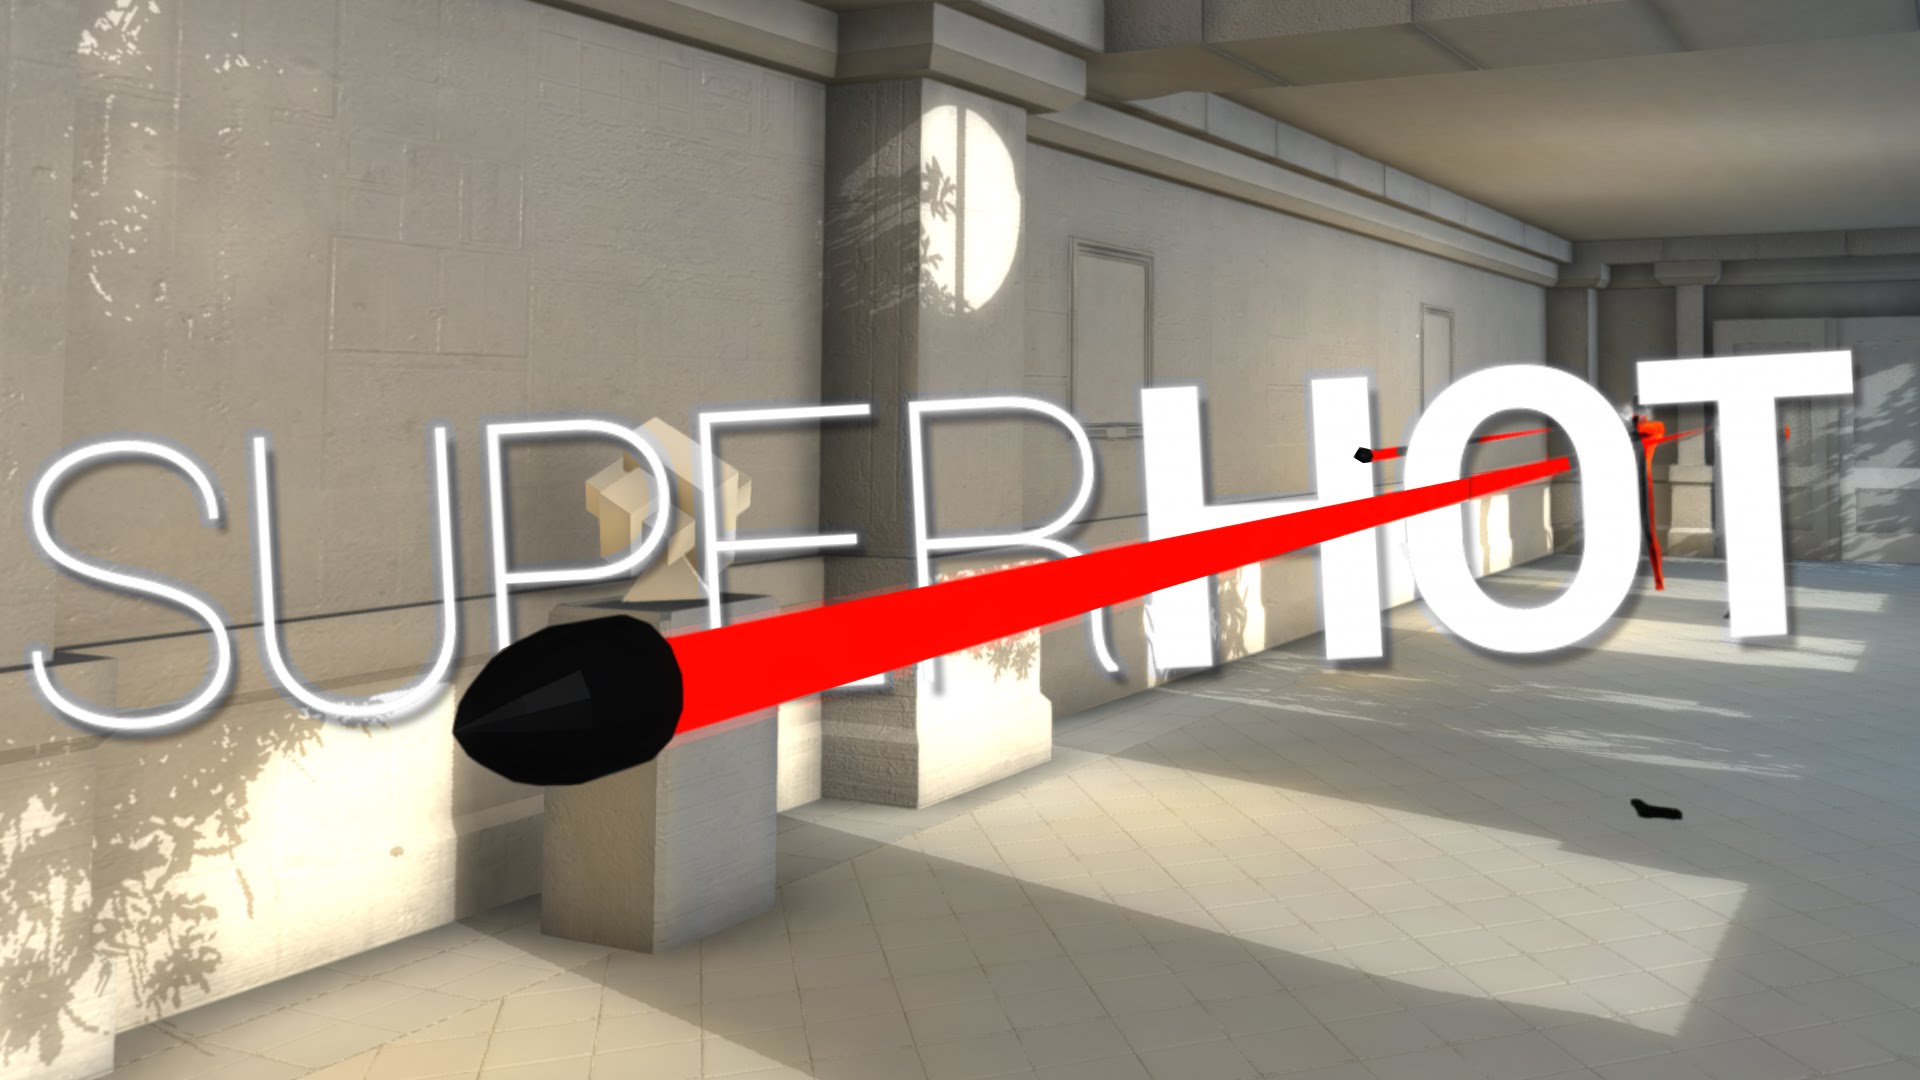 SUPERHOT Pics, Video Game Collection